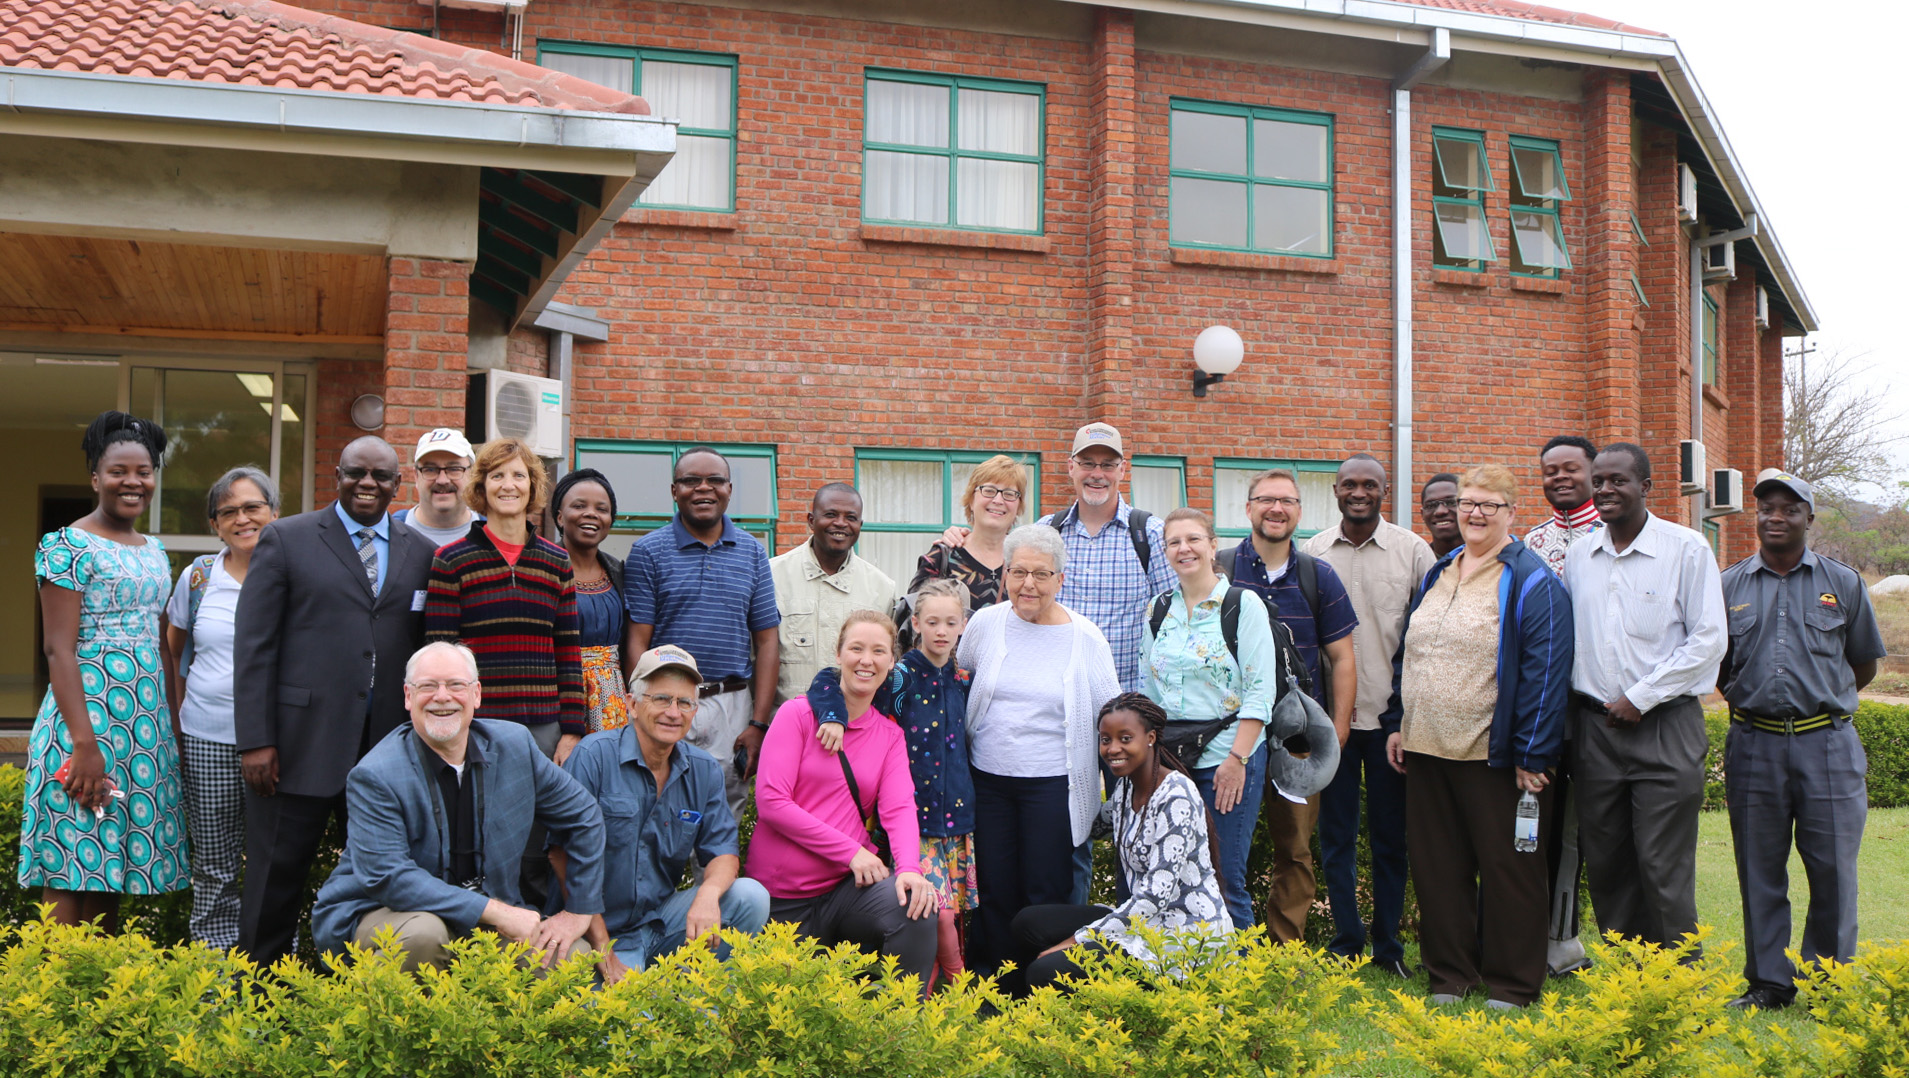 Members of a United Methodist delegation from Iowa and staff from Africa University pose in front of the Ubuntu Center, a retreat and meeting facility at the United Methodist-related institution in Mutare, Zimbabwe. Photo by Eveline Chikwanah.